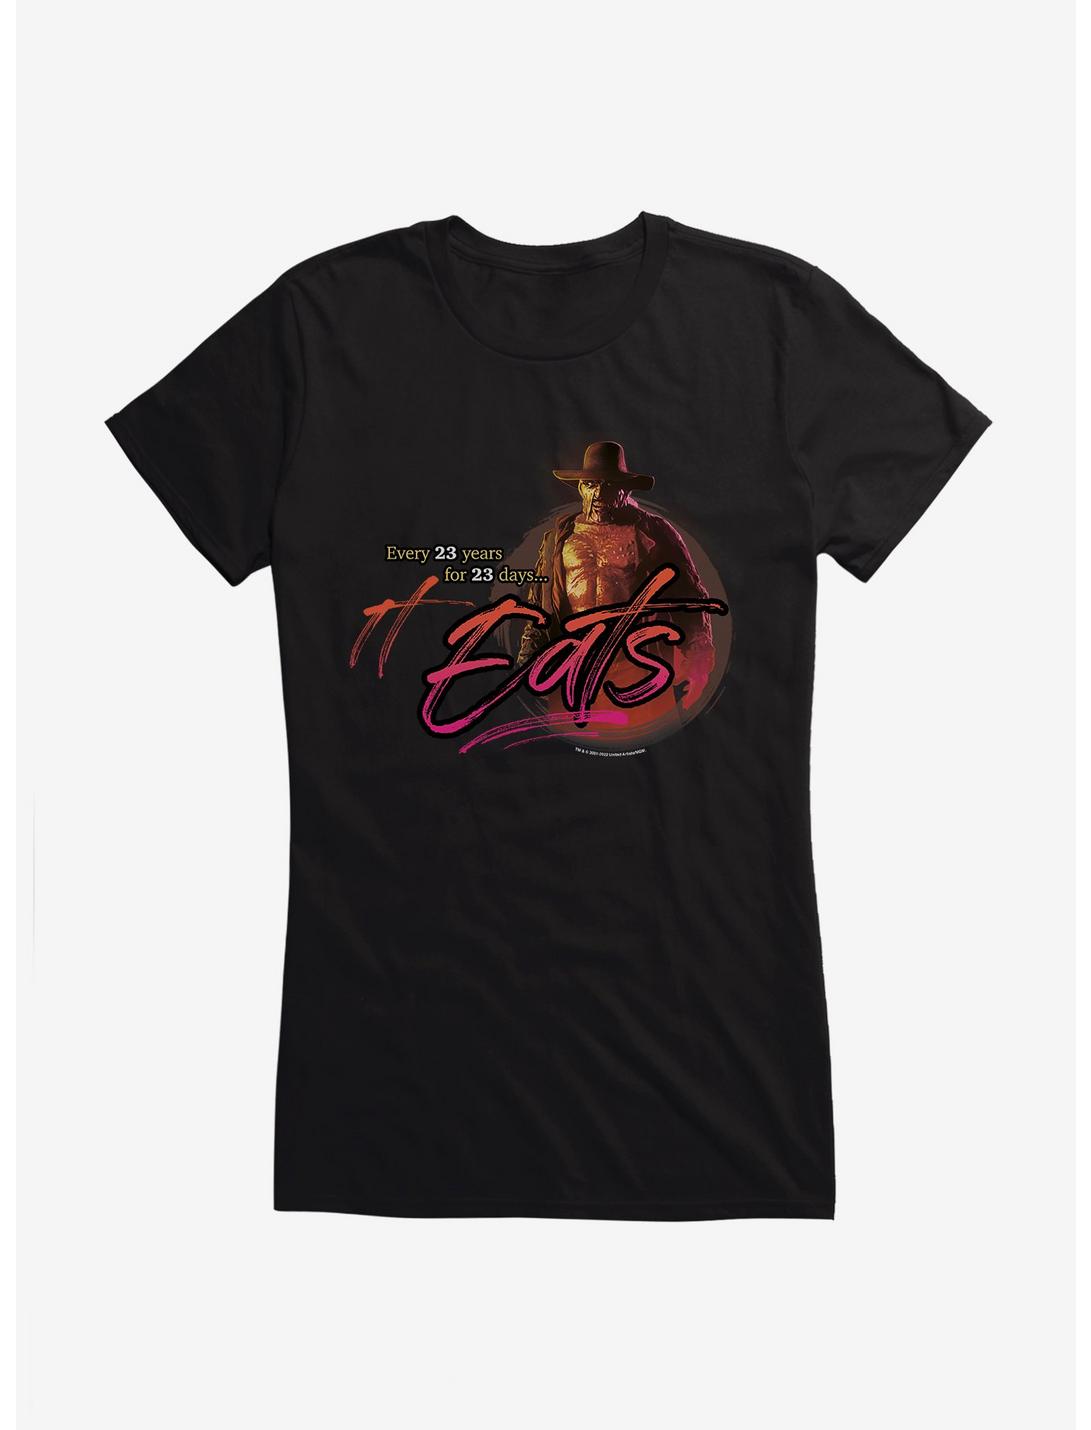 Jeepers Creepers It Eats Girls T-Shirt, BLACK, hi-res